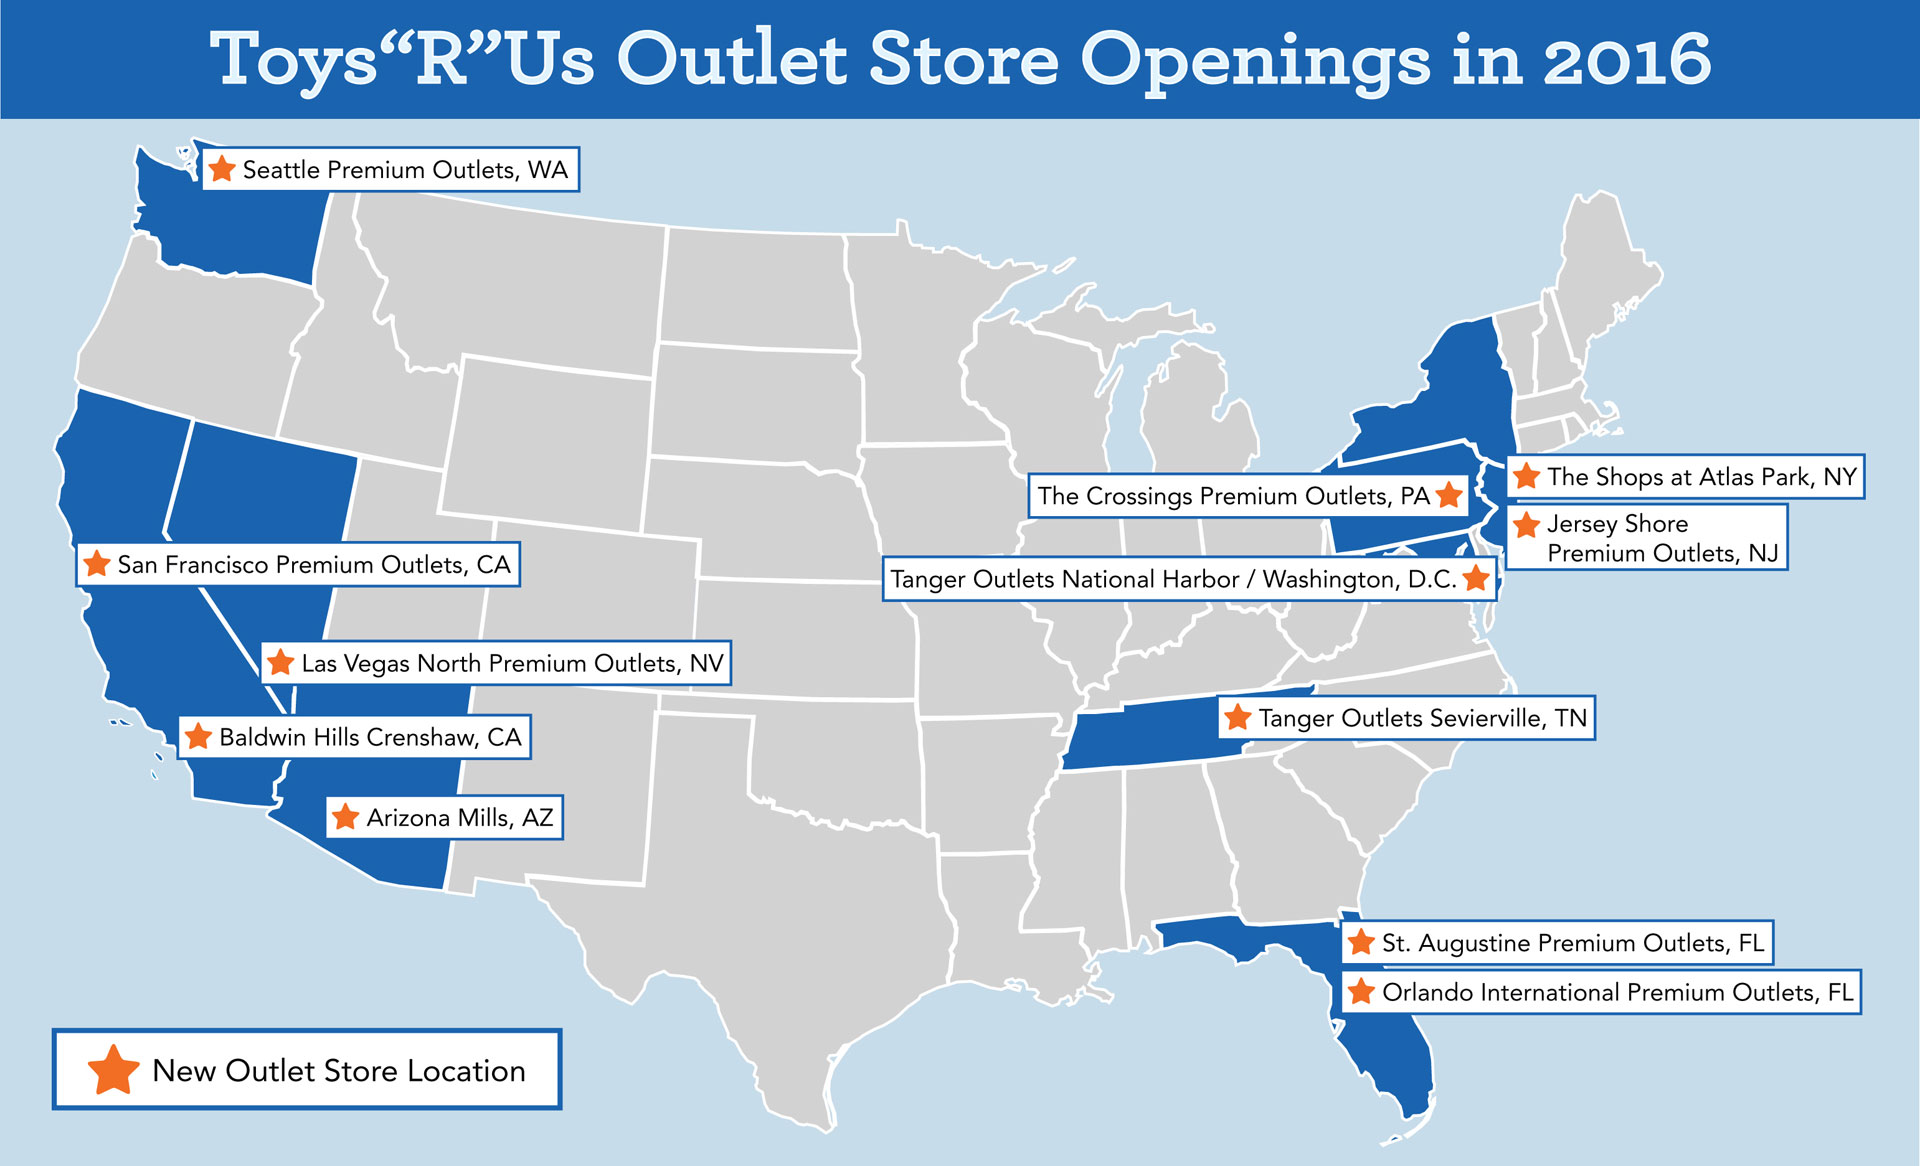 There will be nearly 40 Toys“R”Us Outlet locations to shop at by the end of this year 